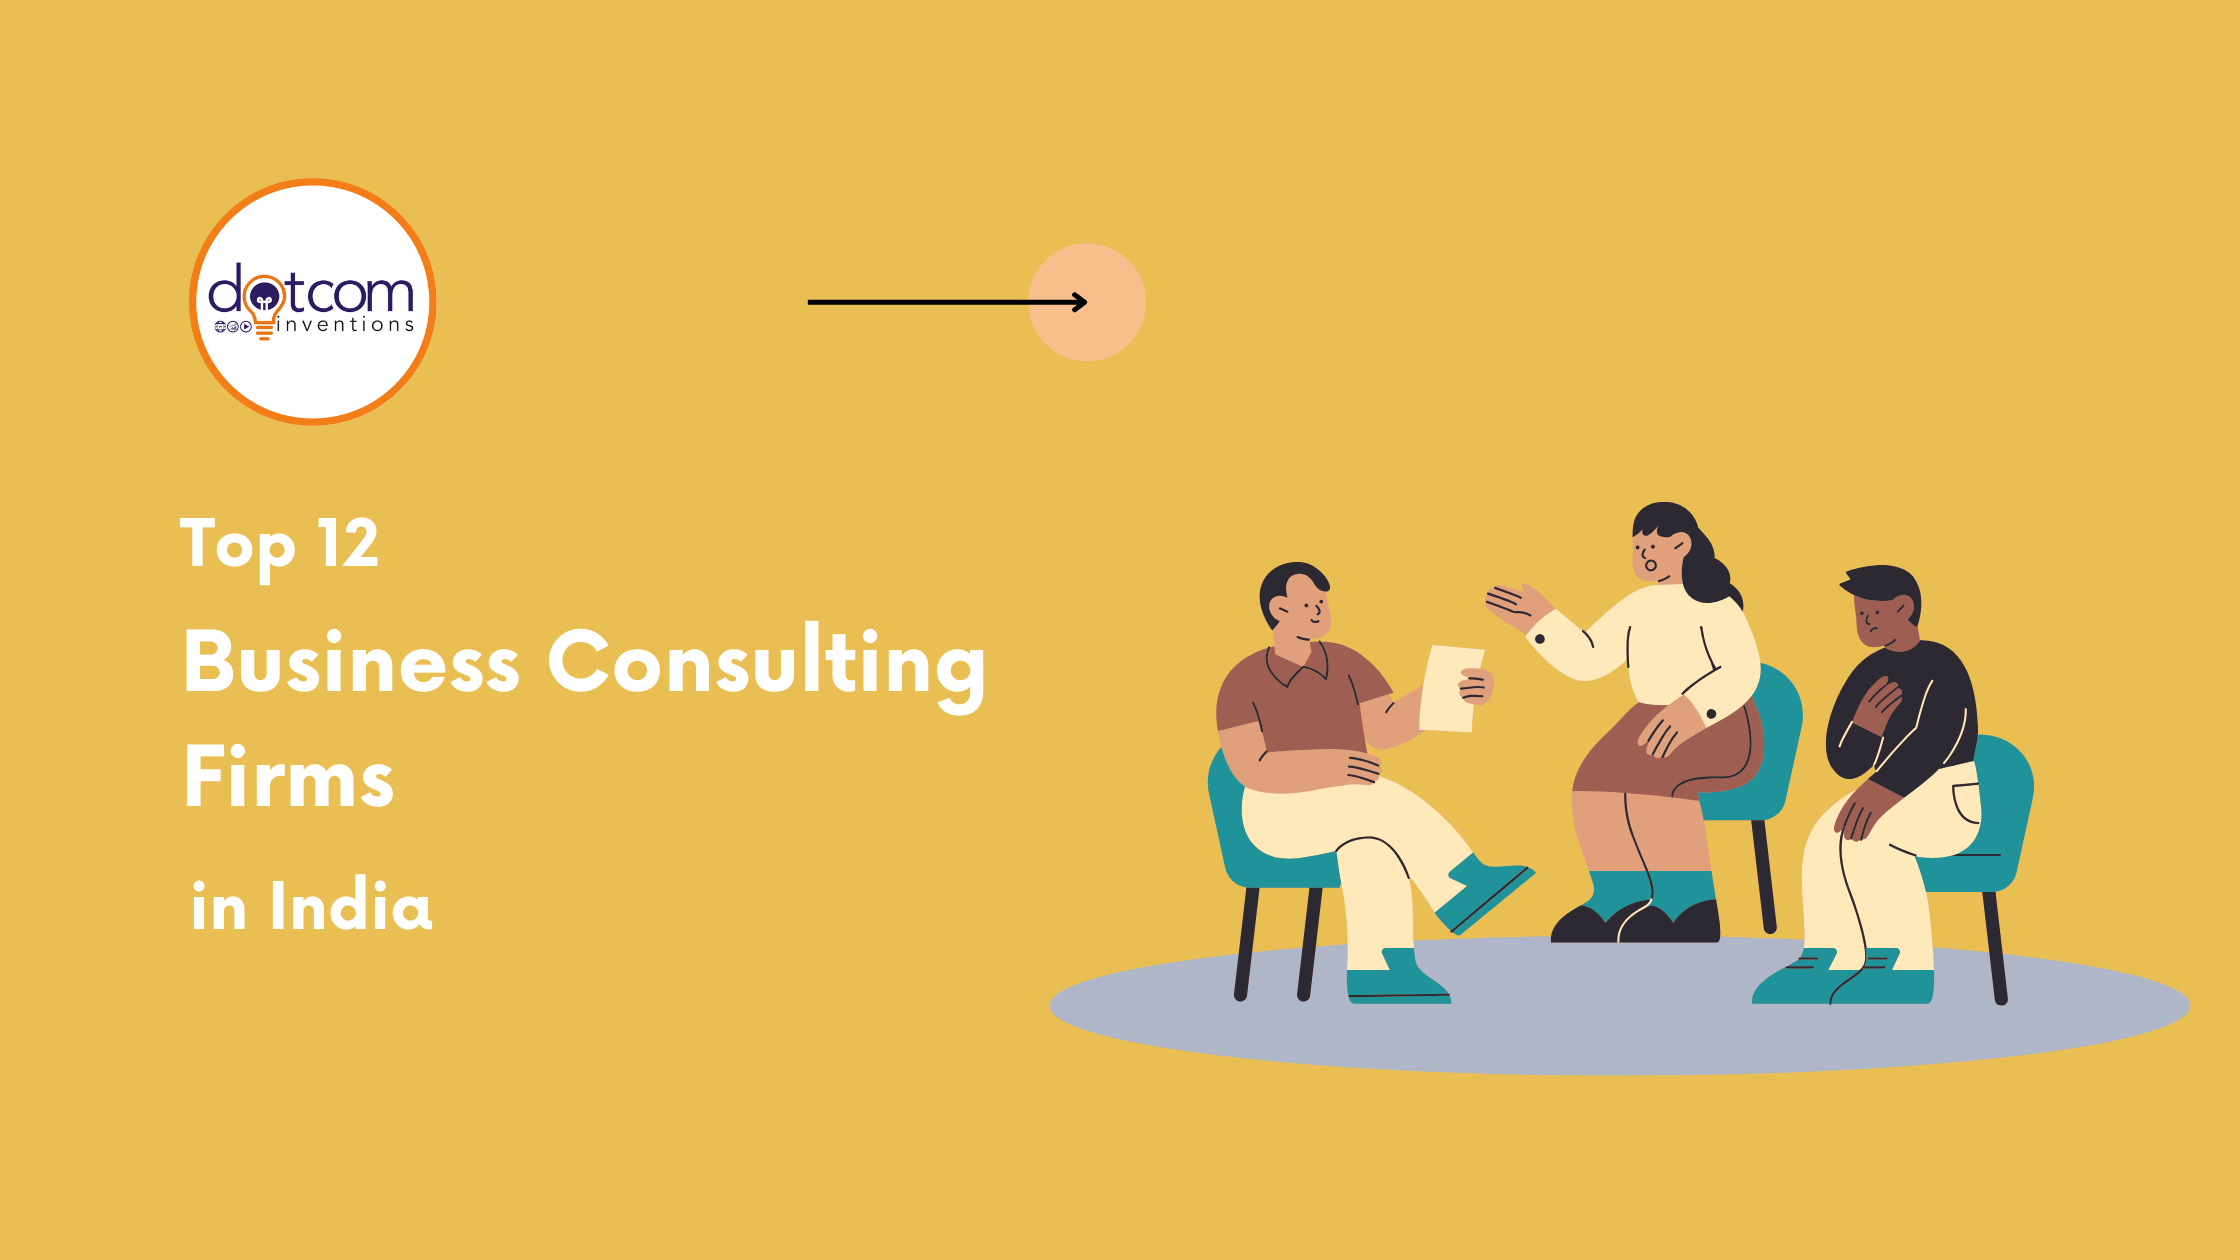 Business consulting firms in India